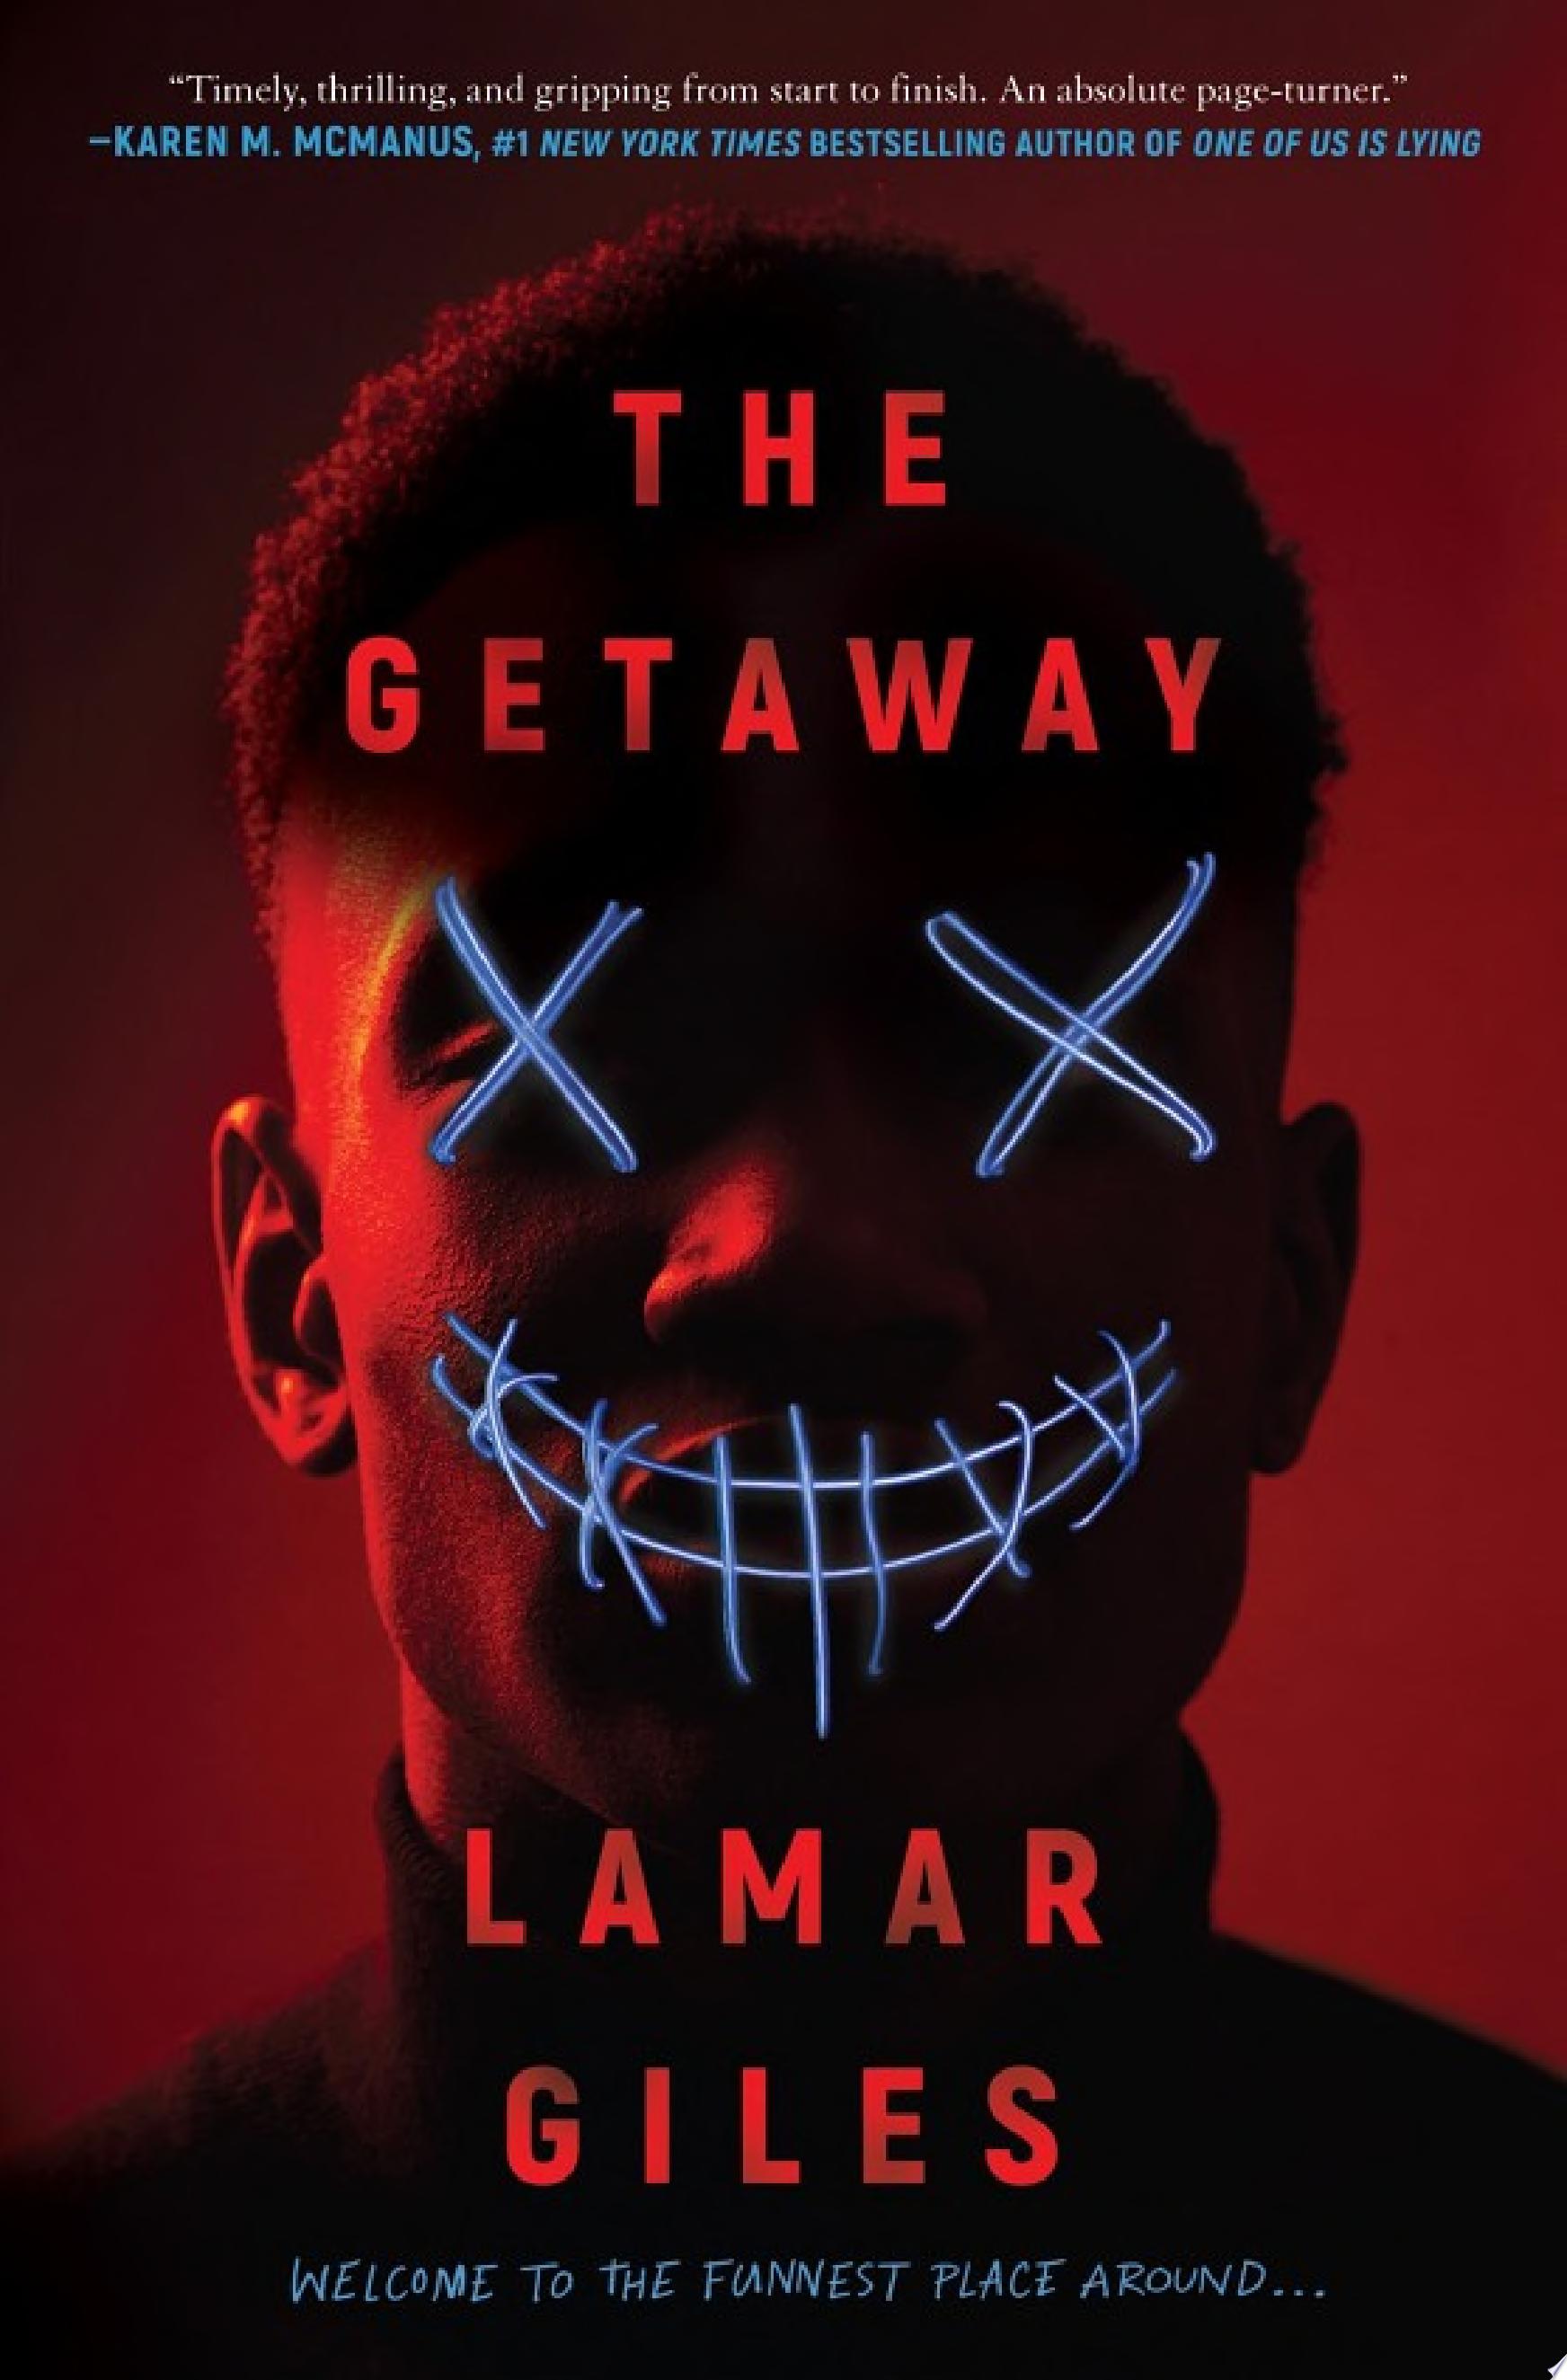 Image for "The Getaway"